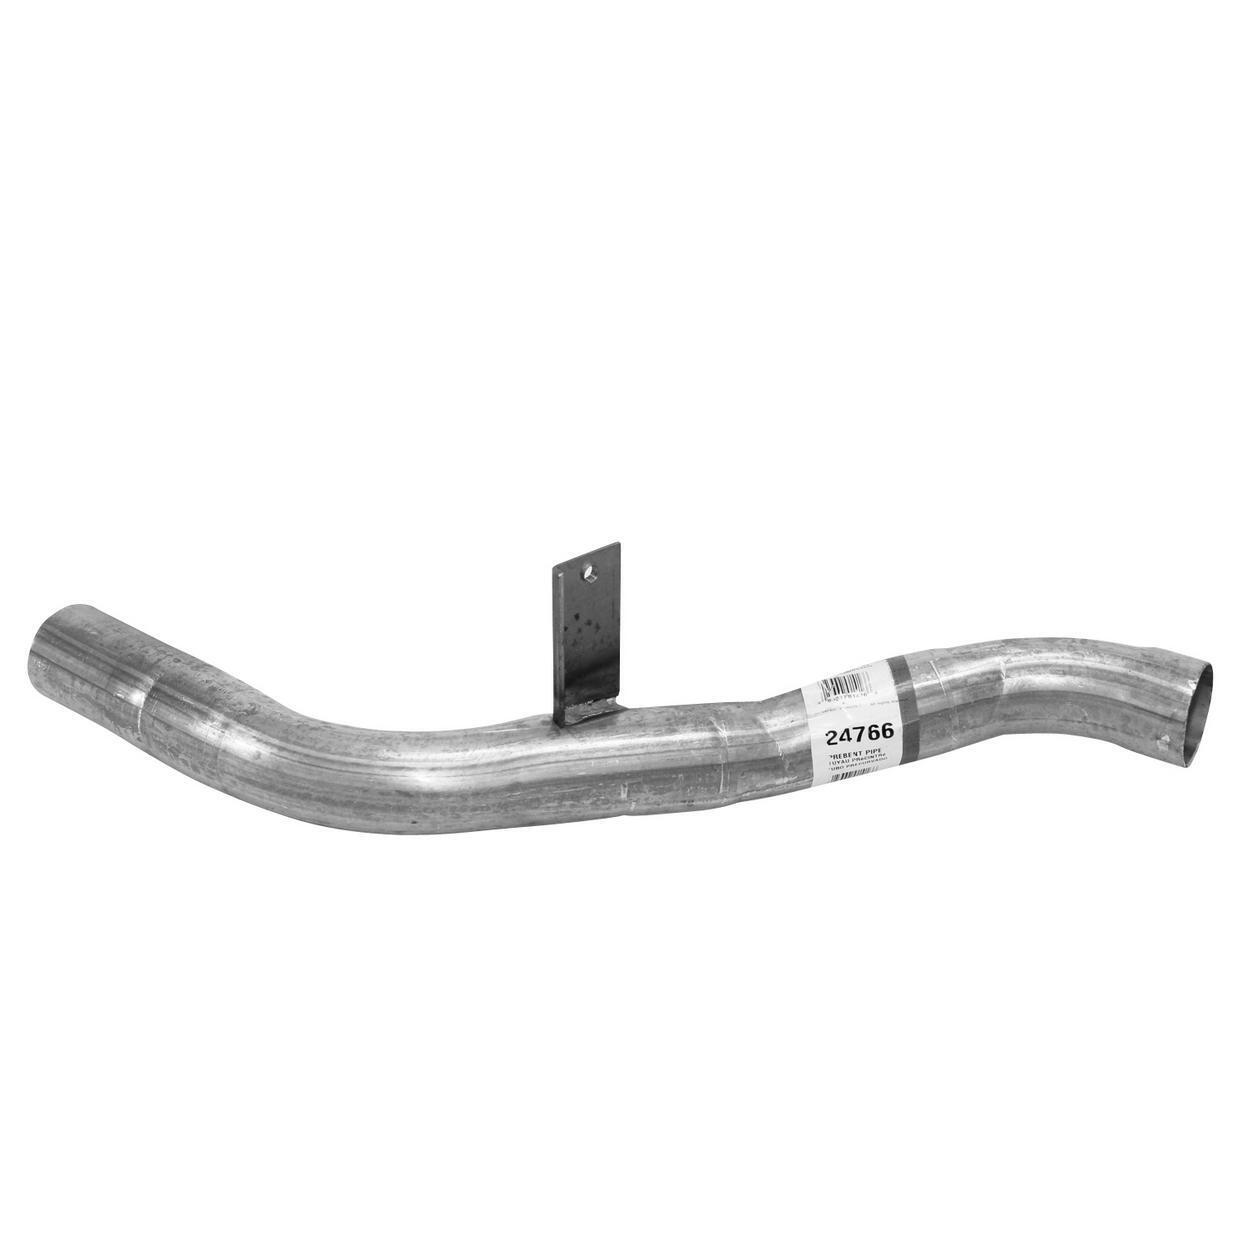 Exhaust Tail Pipe for 1990-1991 Pontiac 6000 3.1L V6 GAS OHV